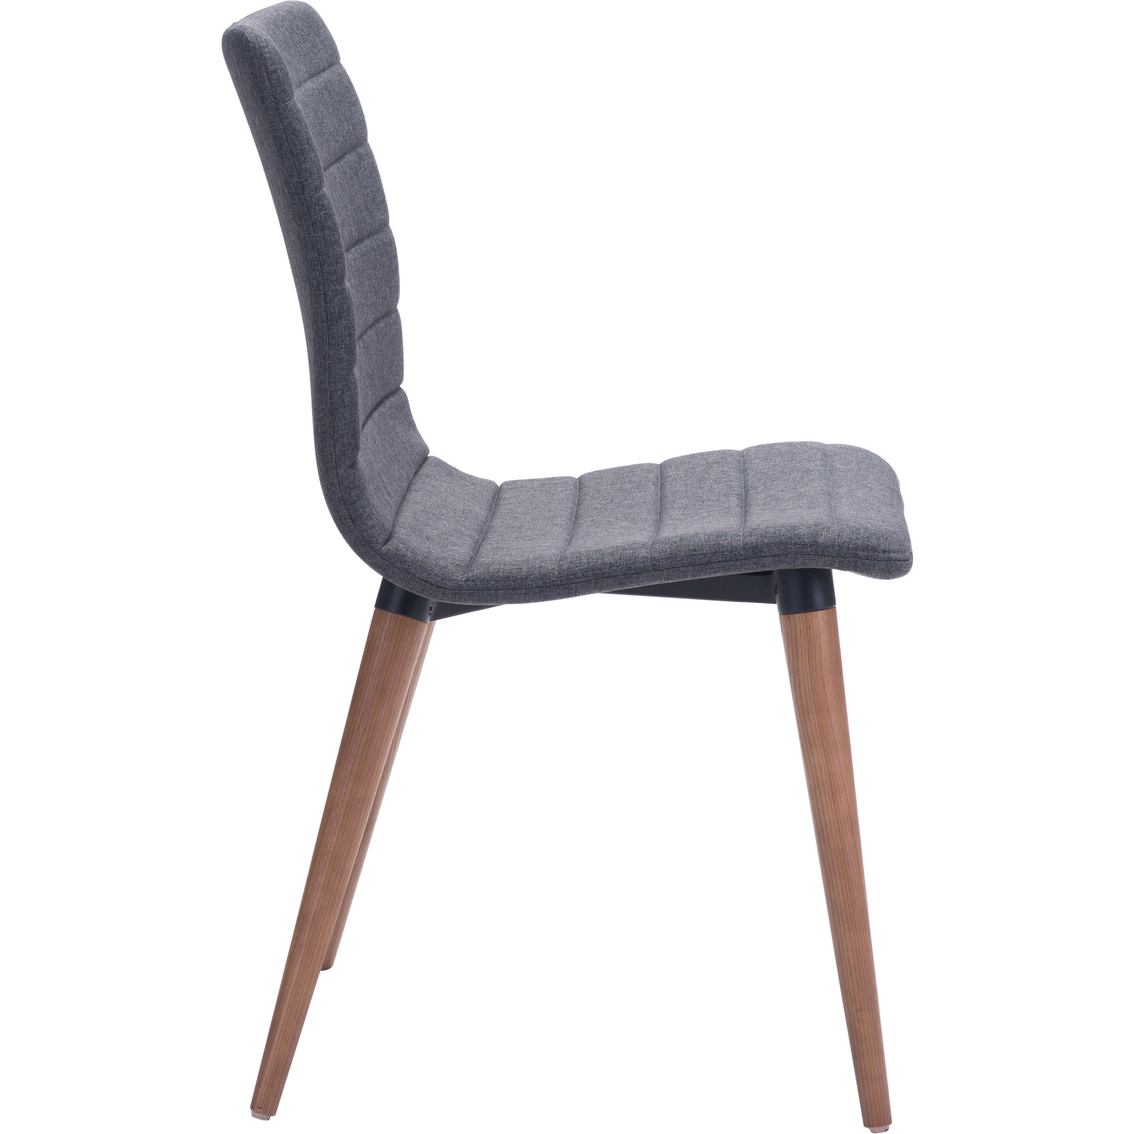 Zuo Jericho Dining Chair 2 Pk. - Image 2 of 8